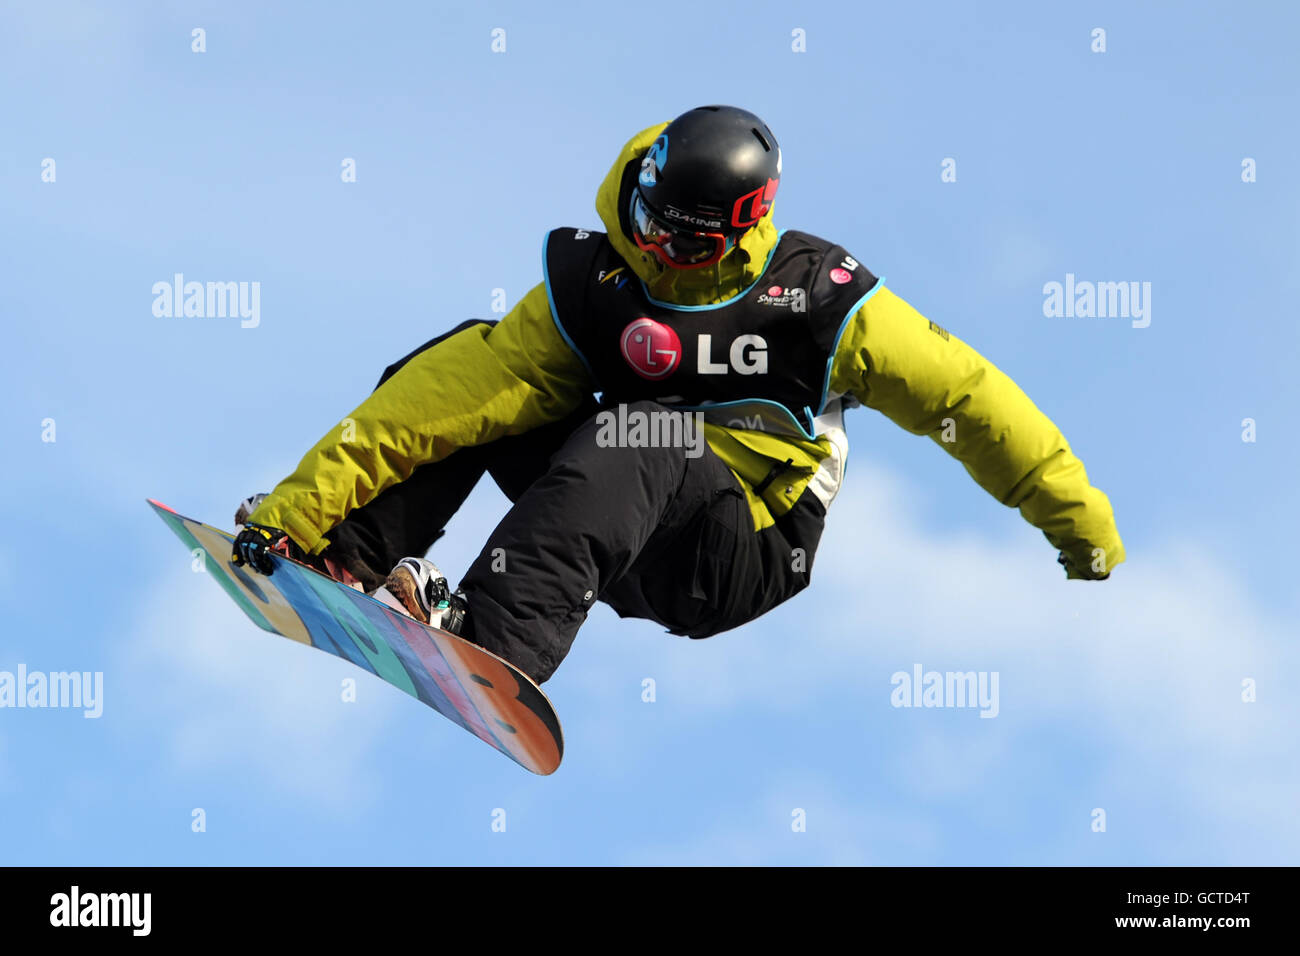 Carles Torner of Spain during the LG Snowboard FIS World Cup in London Stock Photo